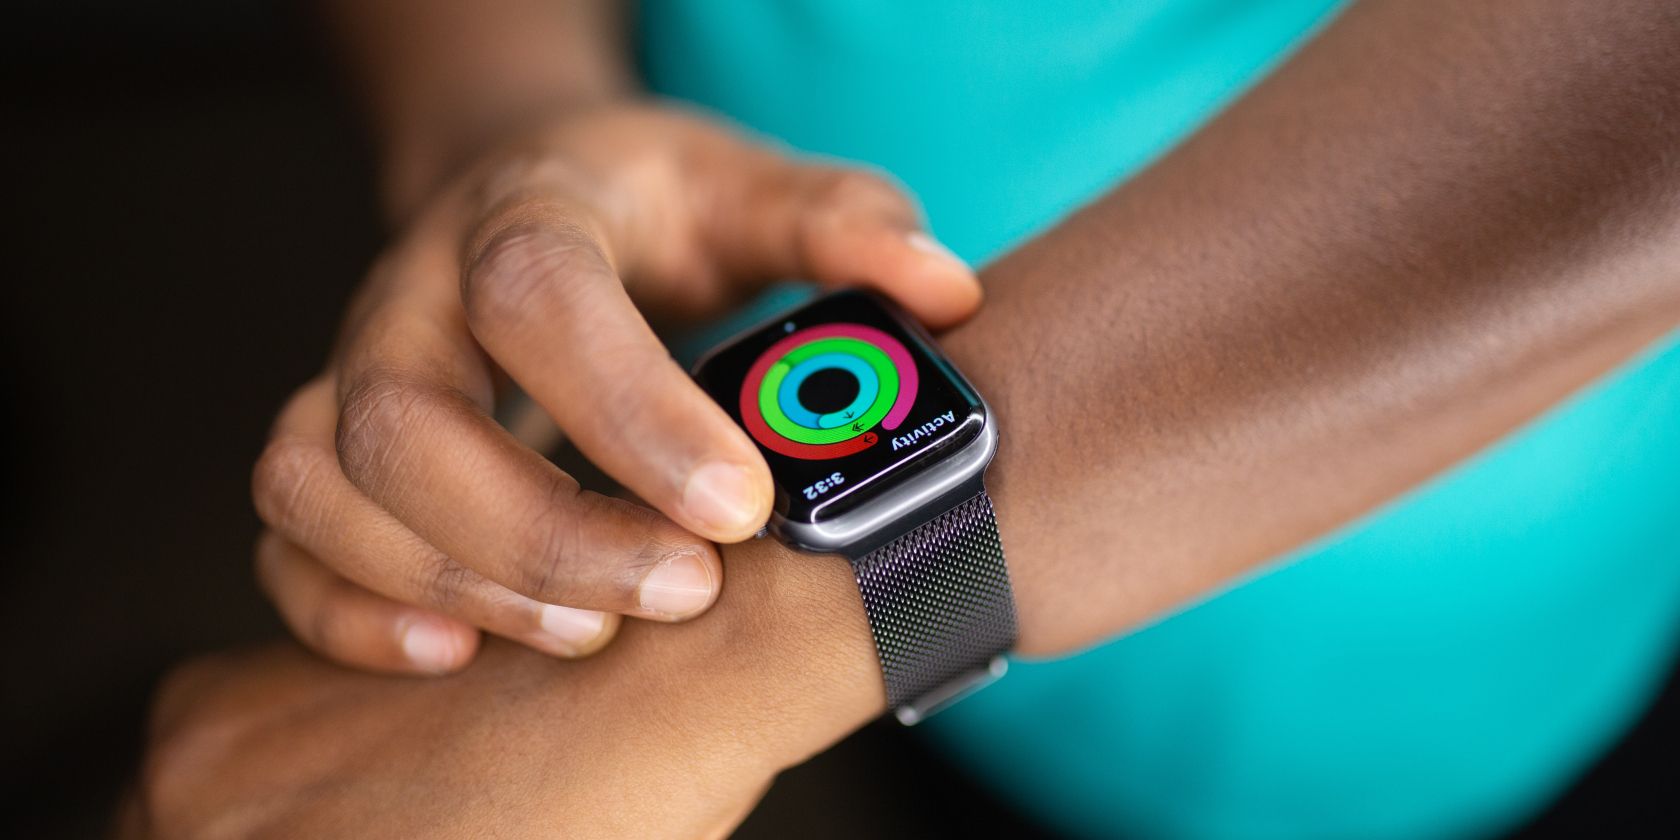 person wearing an apple watch while pressing its button